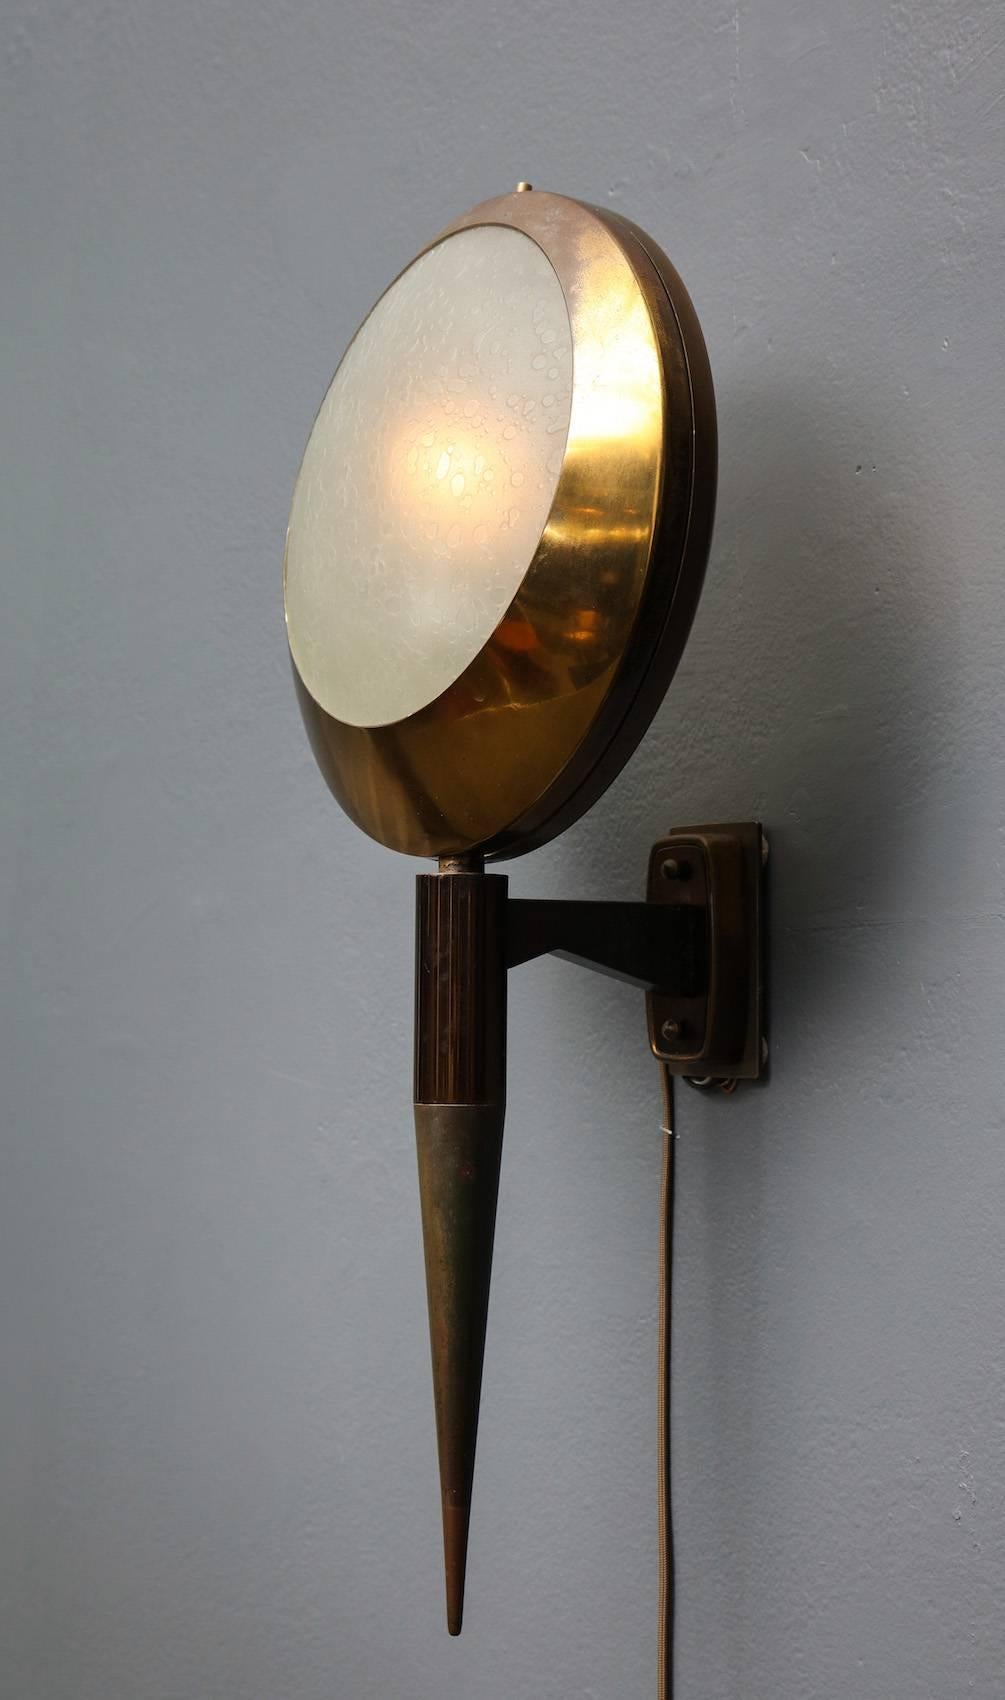 Rare pair of sconces, Model #2128 by Stilnovo.
Polished and burnished brass frames with textured, frosted glass diffuser panels on front and back. 1 standard size socket per sconce. New backplates created to conform to US J-box. Patination and